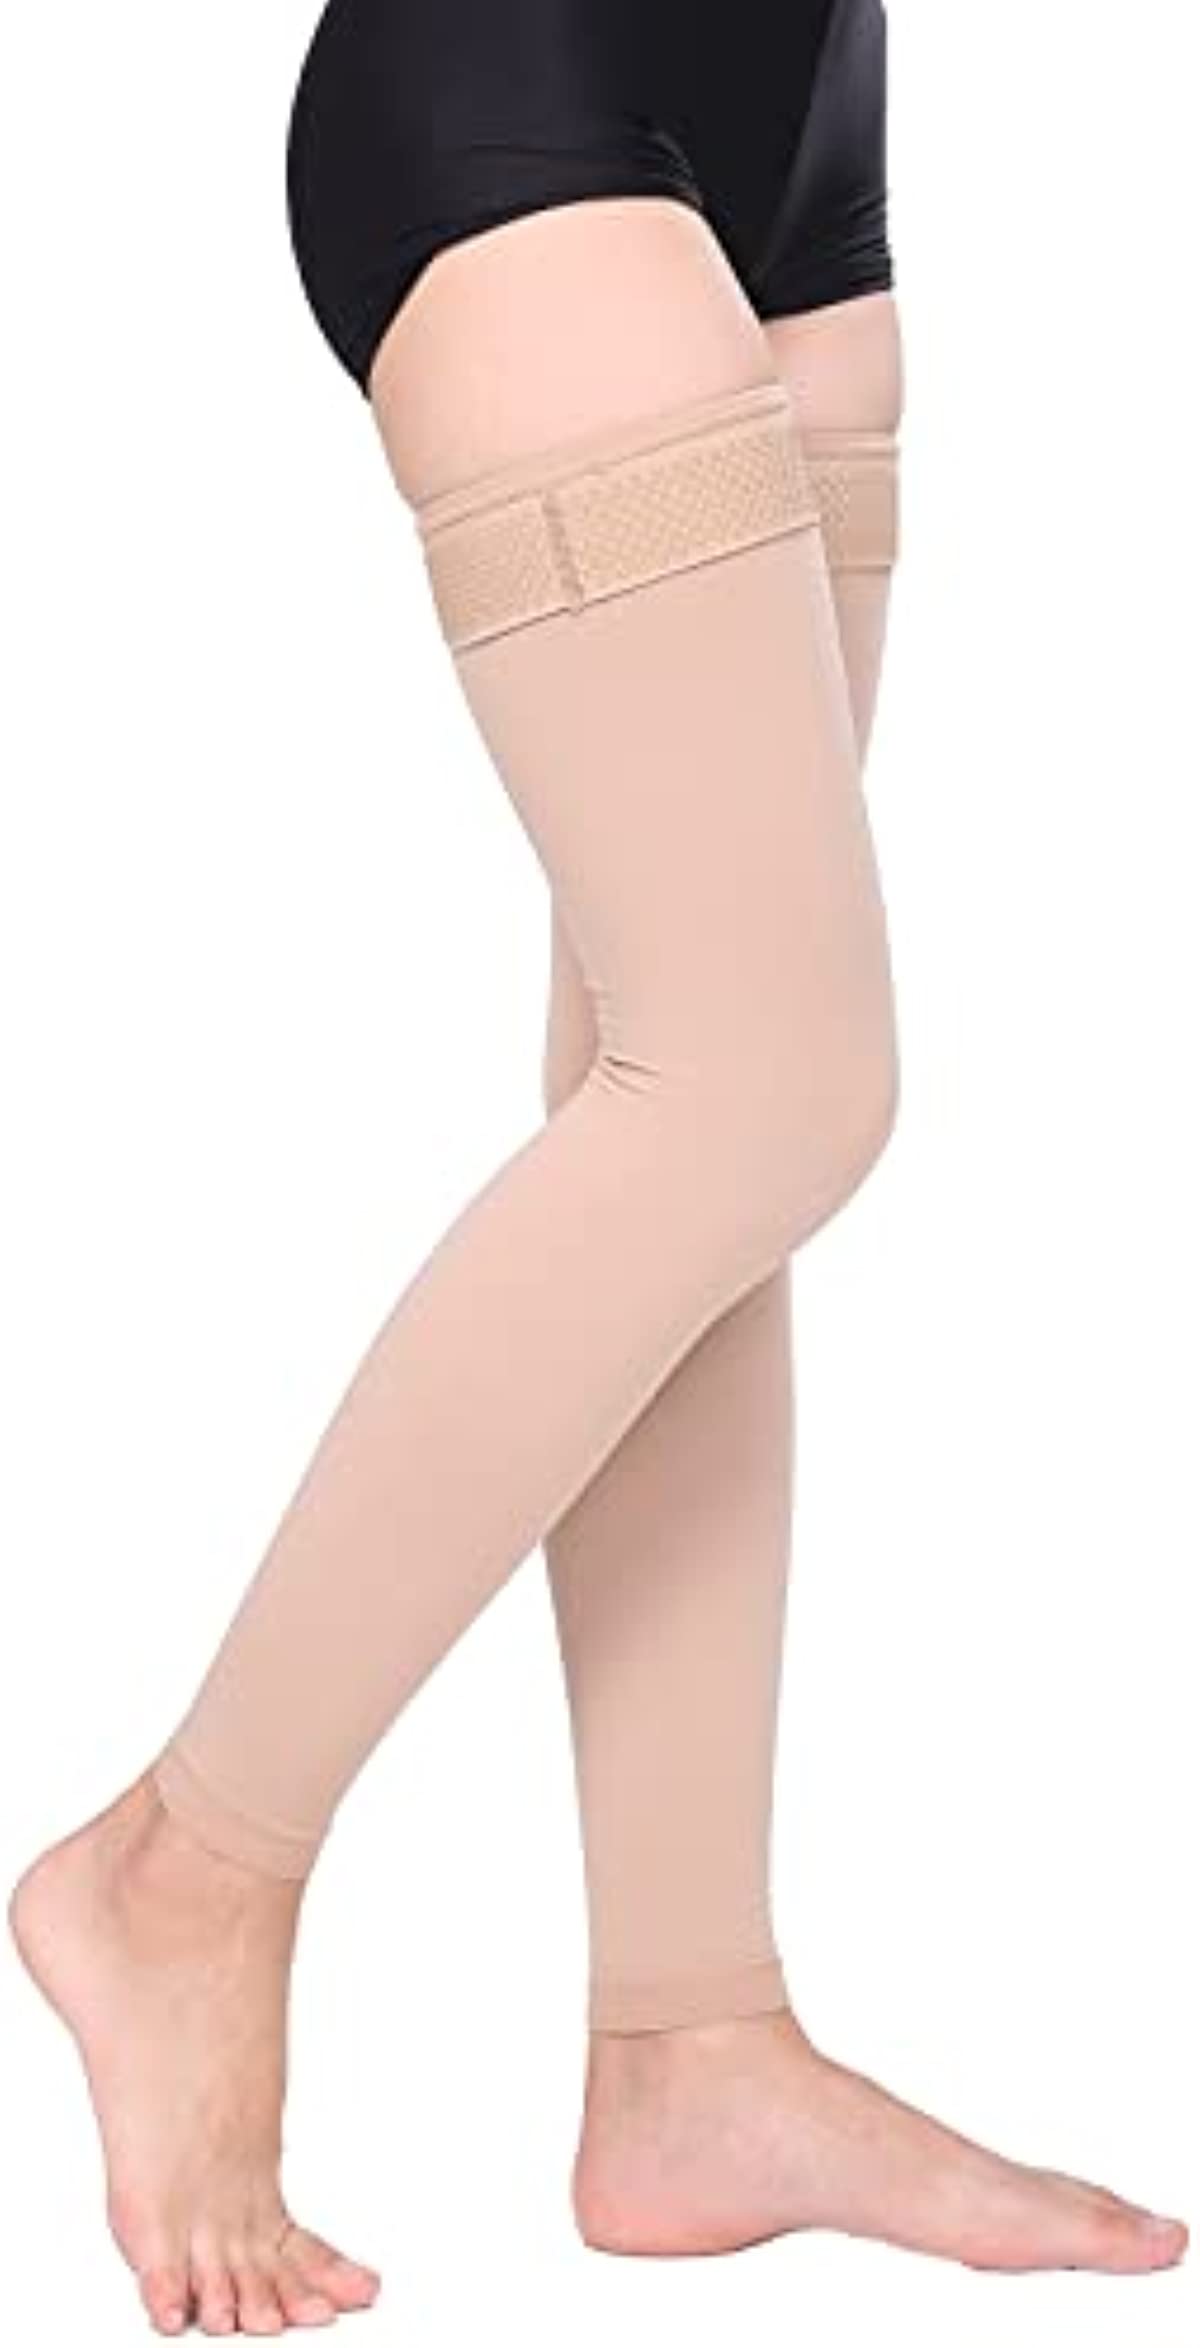 ZOECALA Thigh High Medical Compression Stockings for Women & Men,Footless,Firm Support Hose 20-30 mmHg Compression Socks for Treatment Varicose Veins Swelling